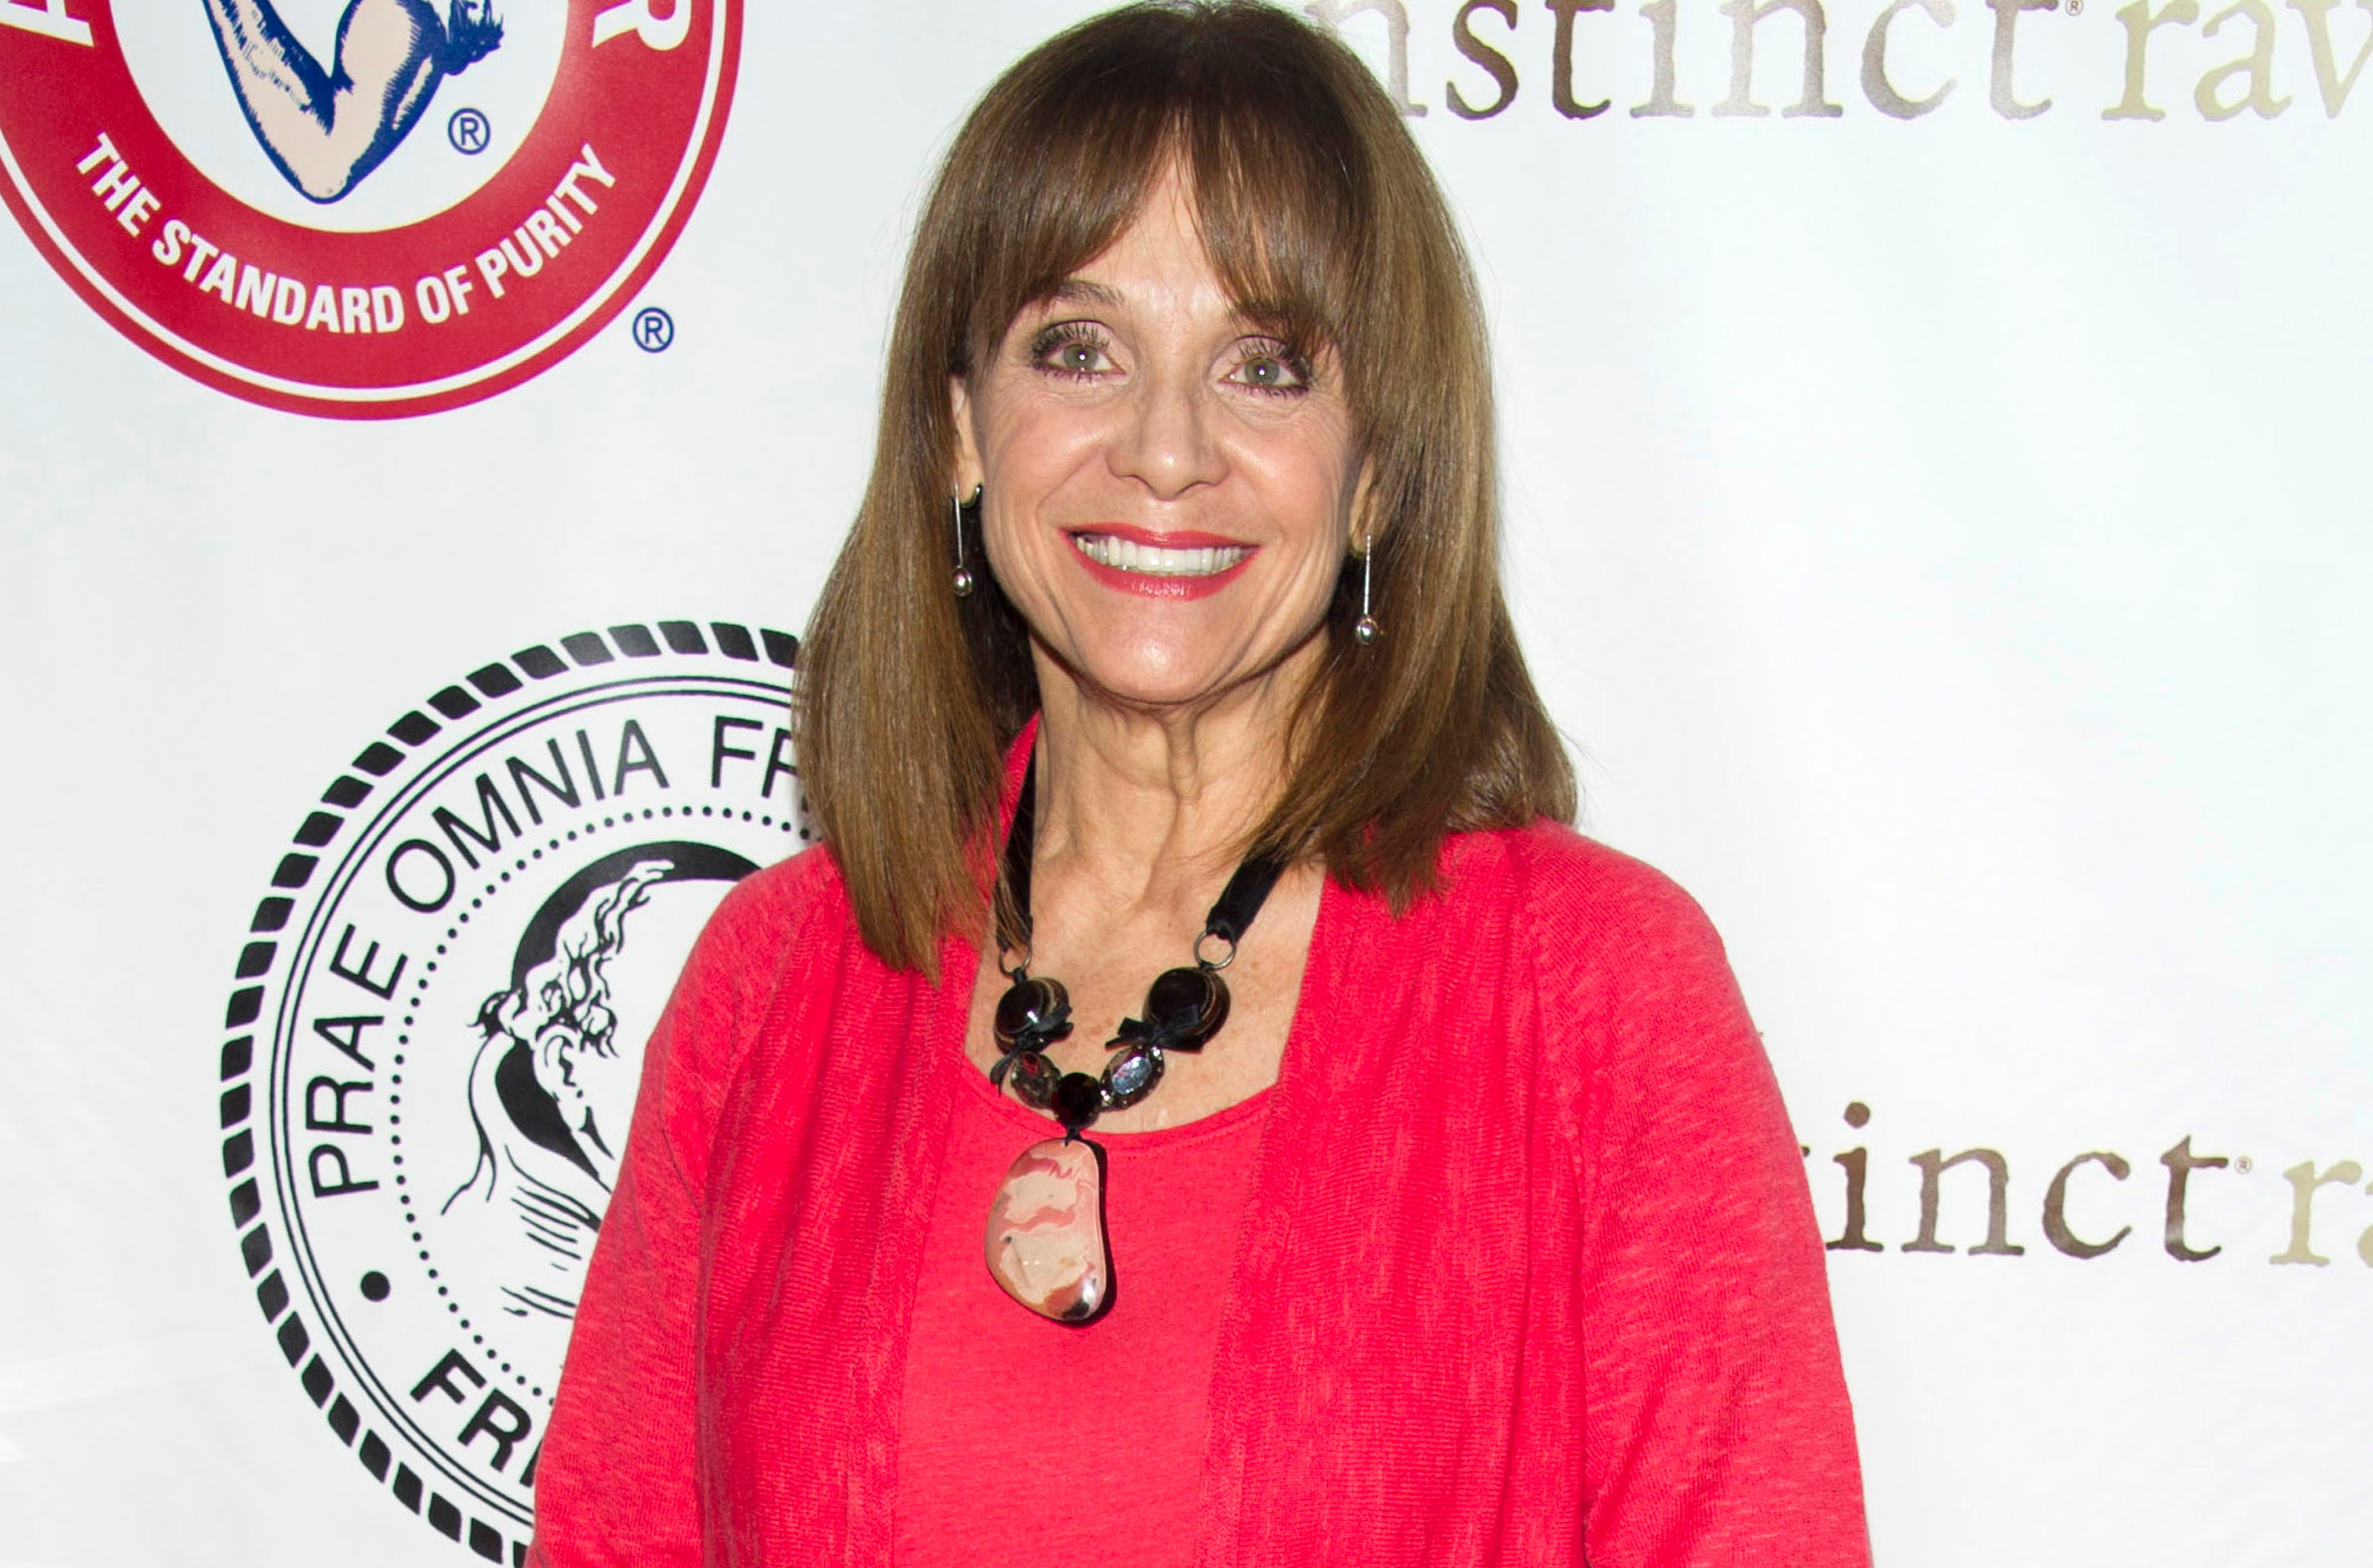 FOX NEWS: Stars react to death of Valerie Harper: 'She was incredibly courageous'